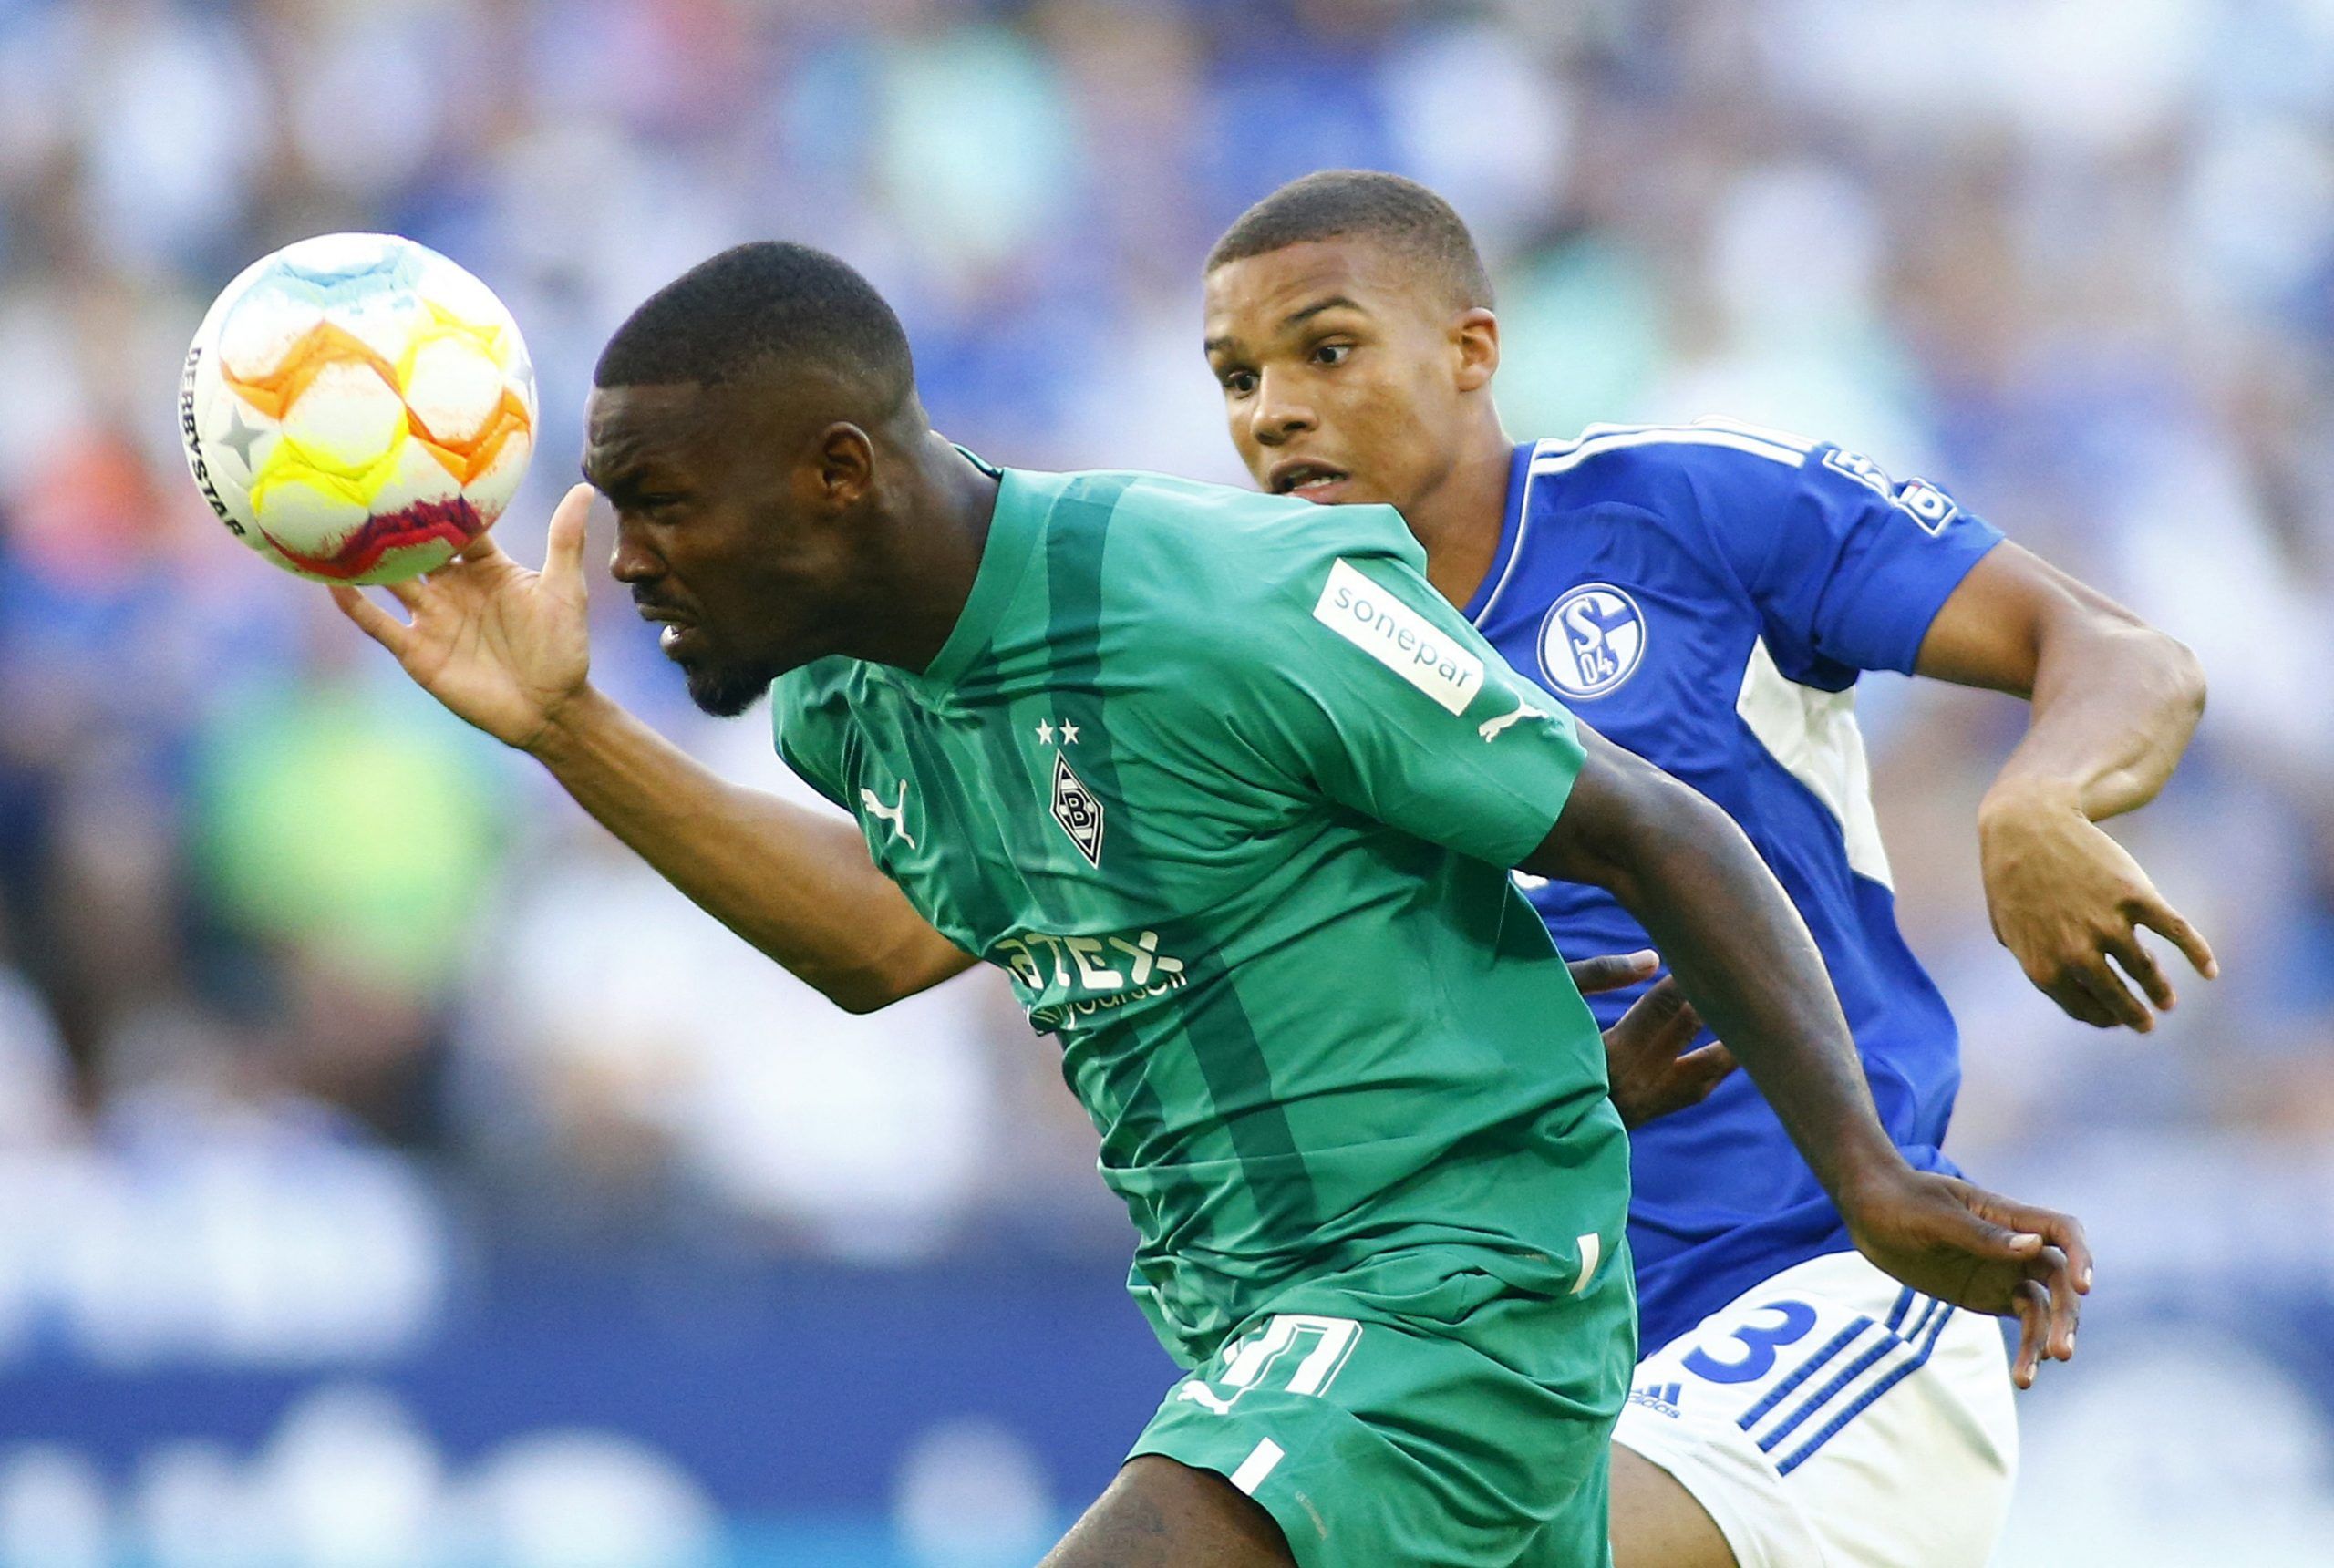 Soccer Football - Bundesliga - Schalke 04 v Borussia Moenchengladbach - Veltins-Arena, Gelsenkirchen, Germany - August 13, 2022  Borussia Moenchengladbach's Marcus Thuram in action with Schalke 04's Malick Thiaw REUTERS/Thilo Schmuelgen DFL REGULATIONS PROHIBIT ANY USE OF PHOTOGRAPHS AS IMAGE SEQUENCES AND/OR QUASI-VIDEO.